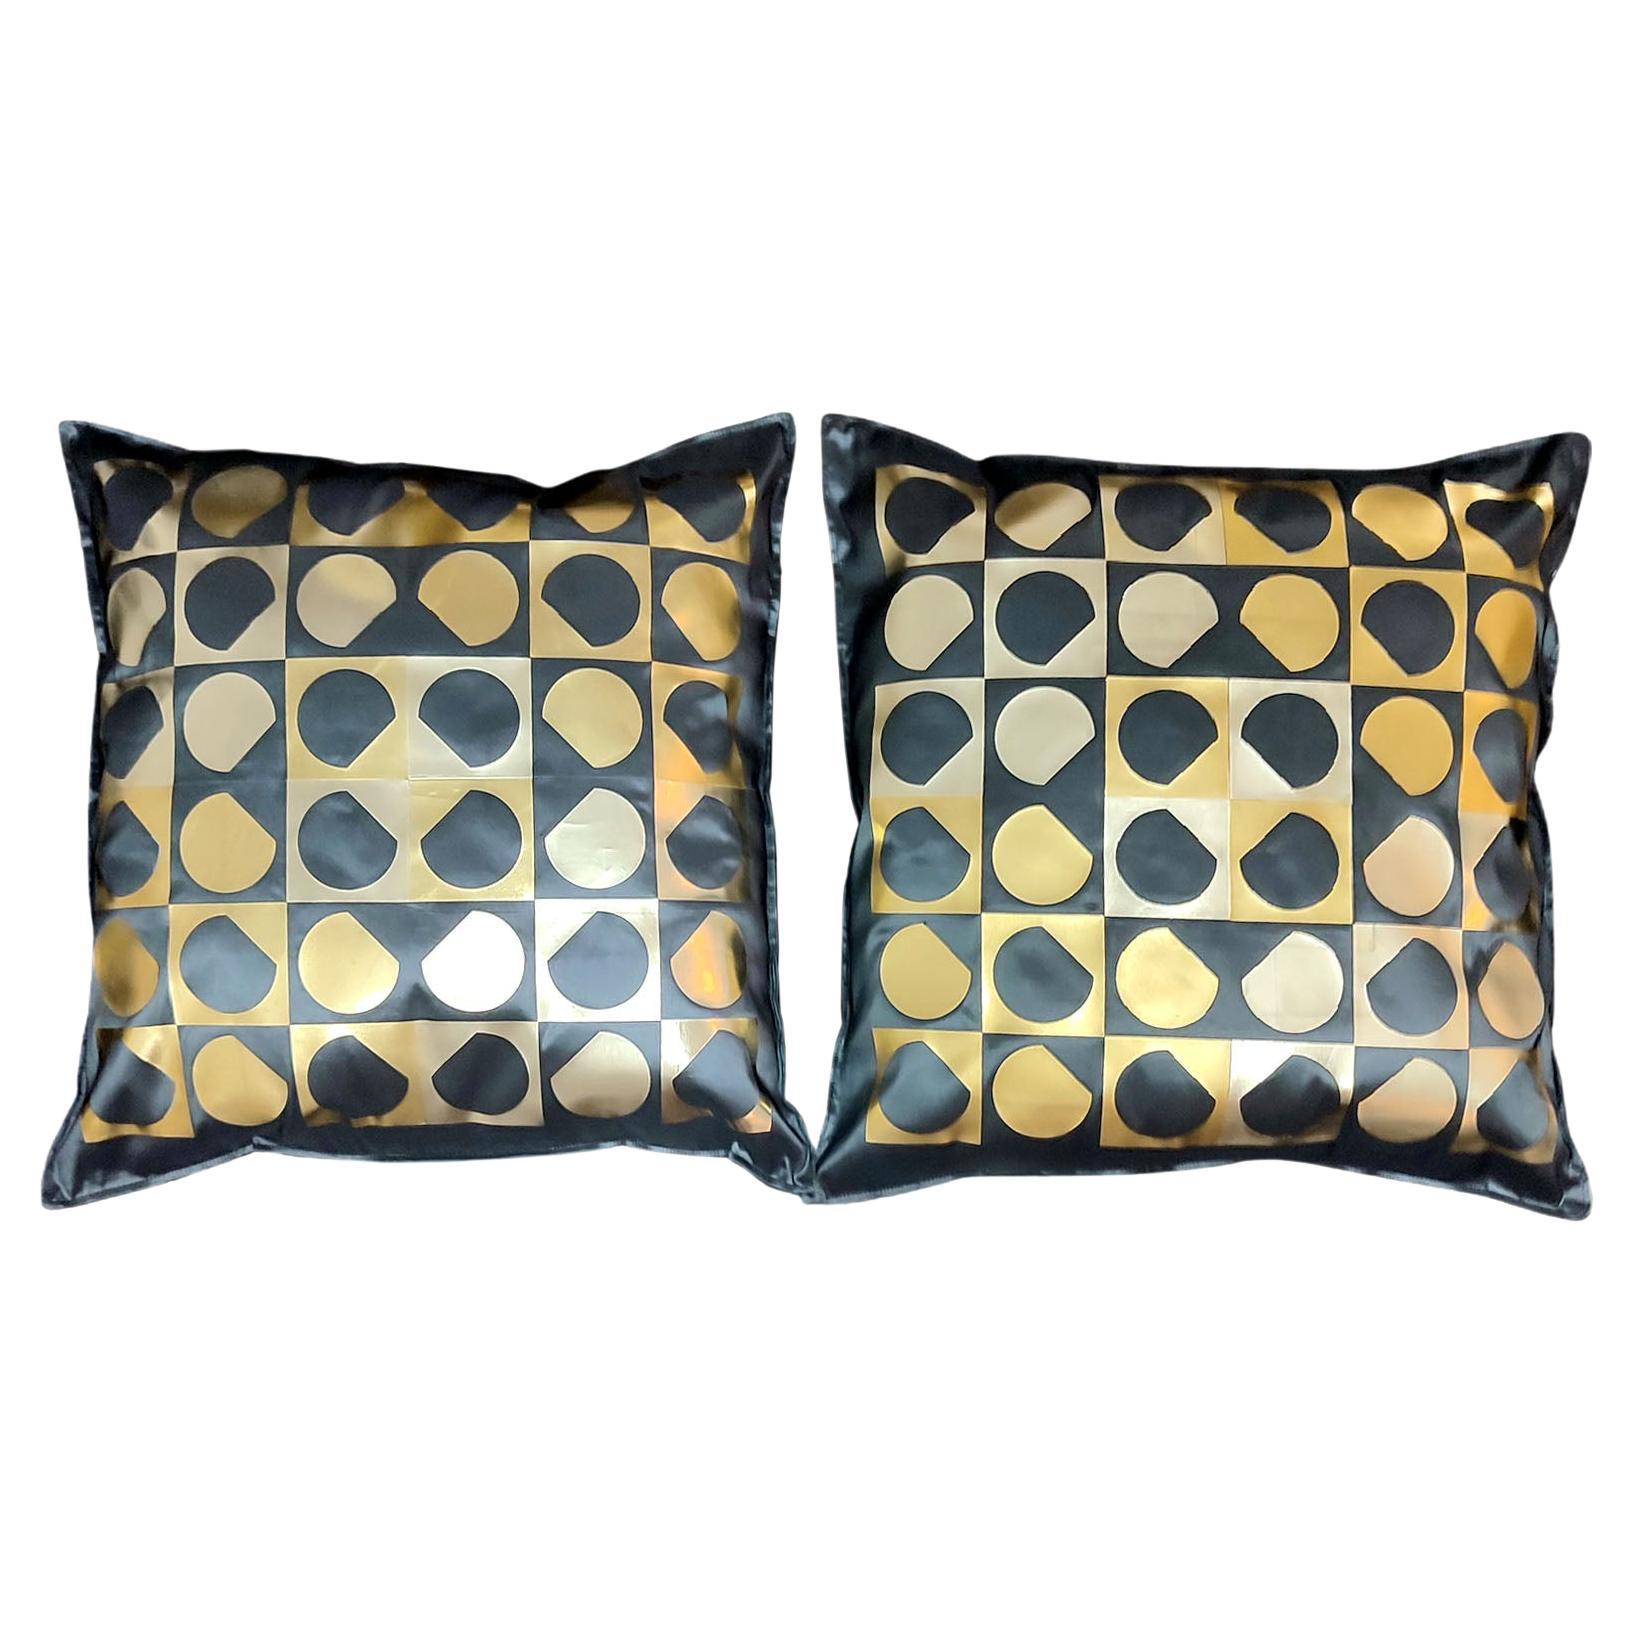 One of a Kind Pair of Pillows, Throw Pillows, Philosophy Pillows "Vasarely V" For Sale